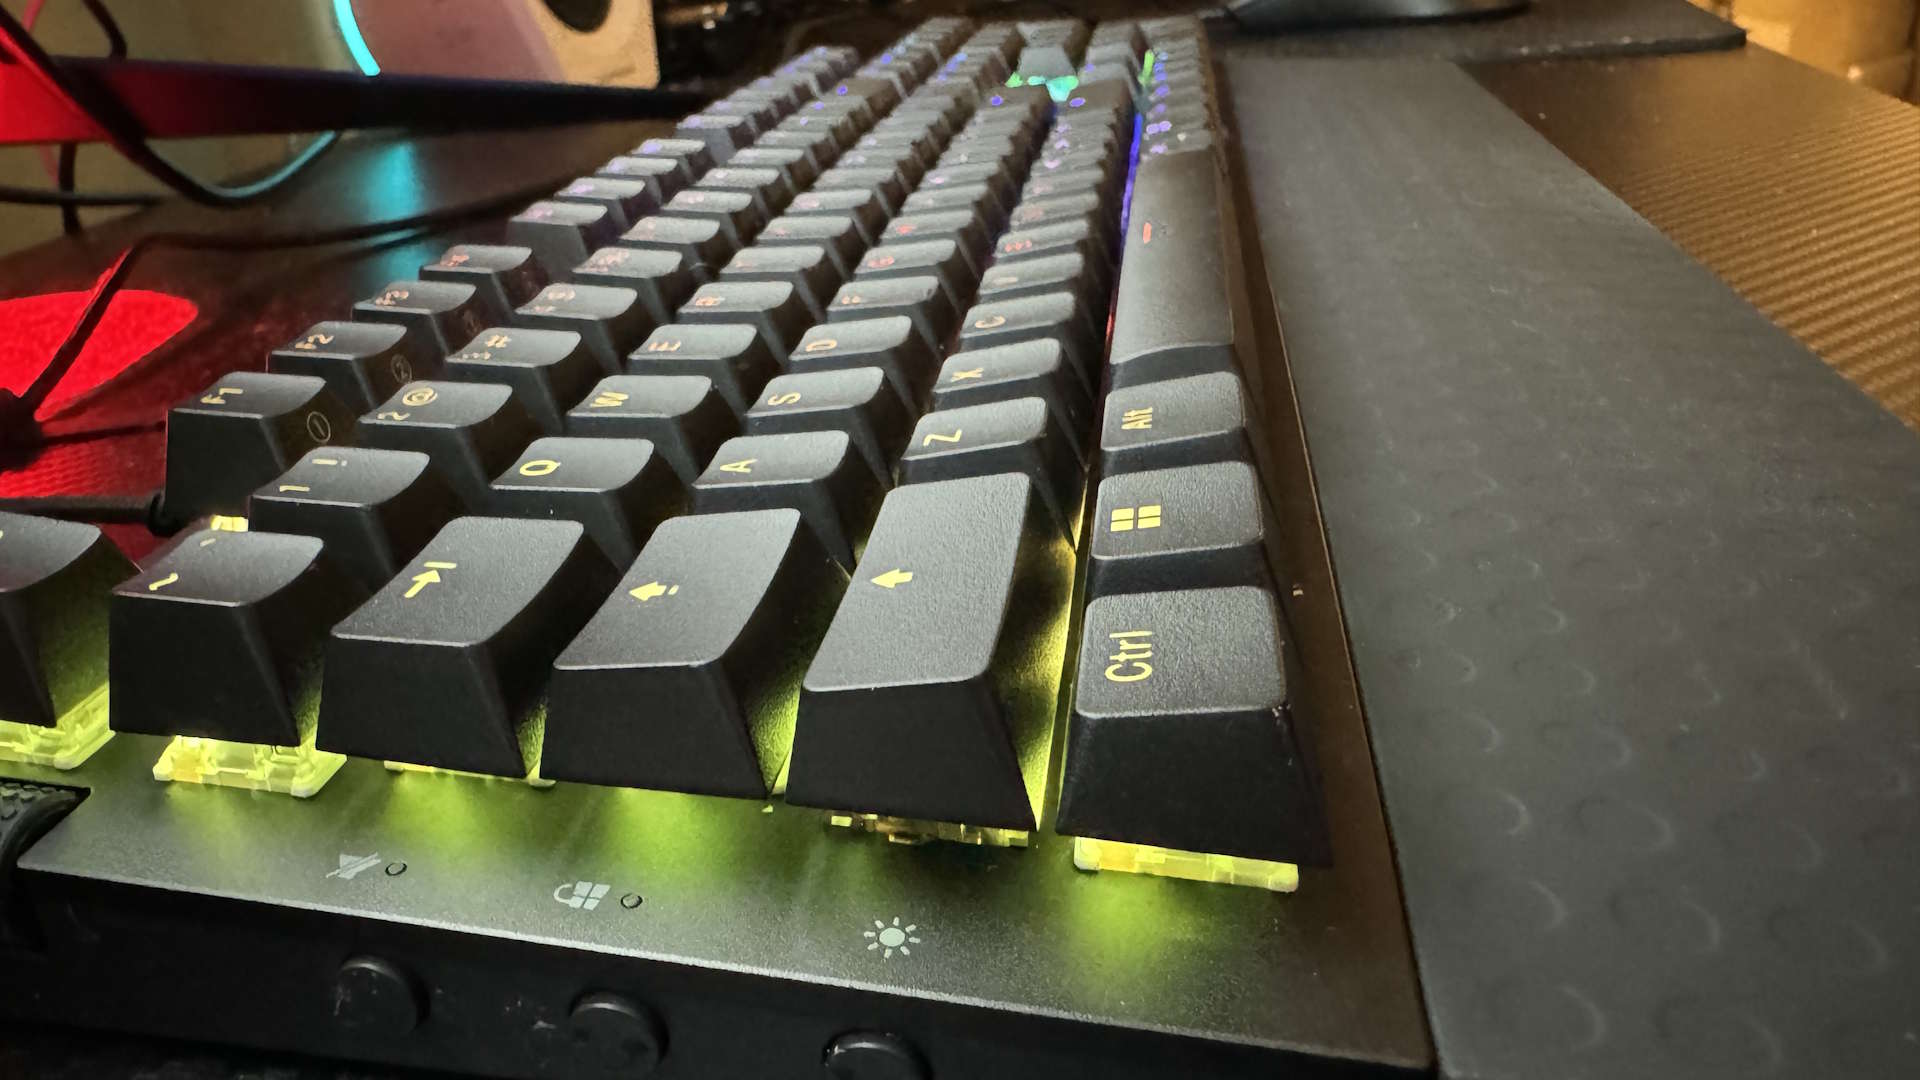 NZXT Function 2 gaming keyboard